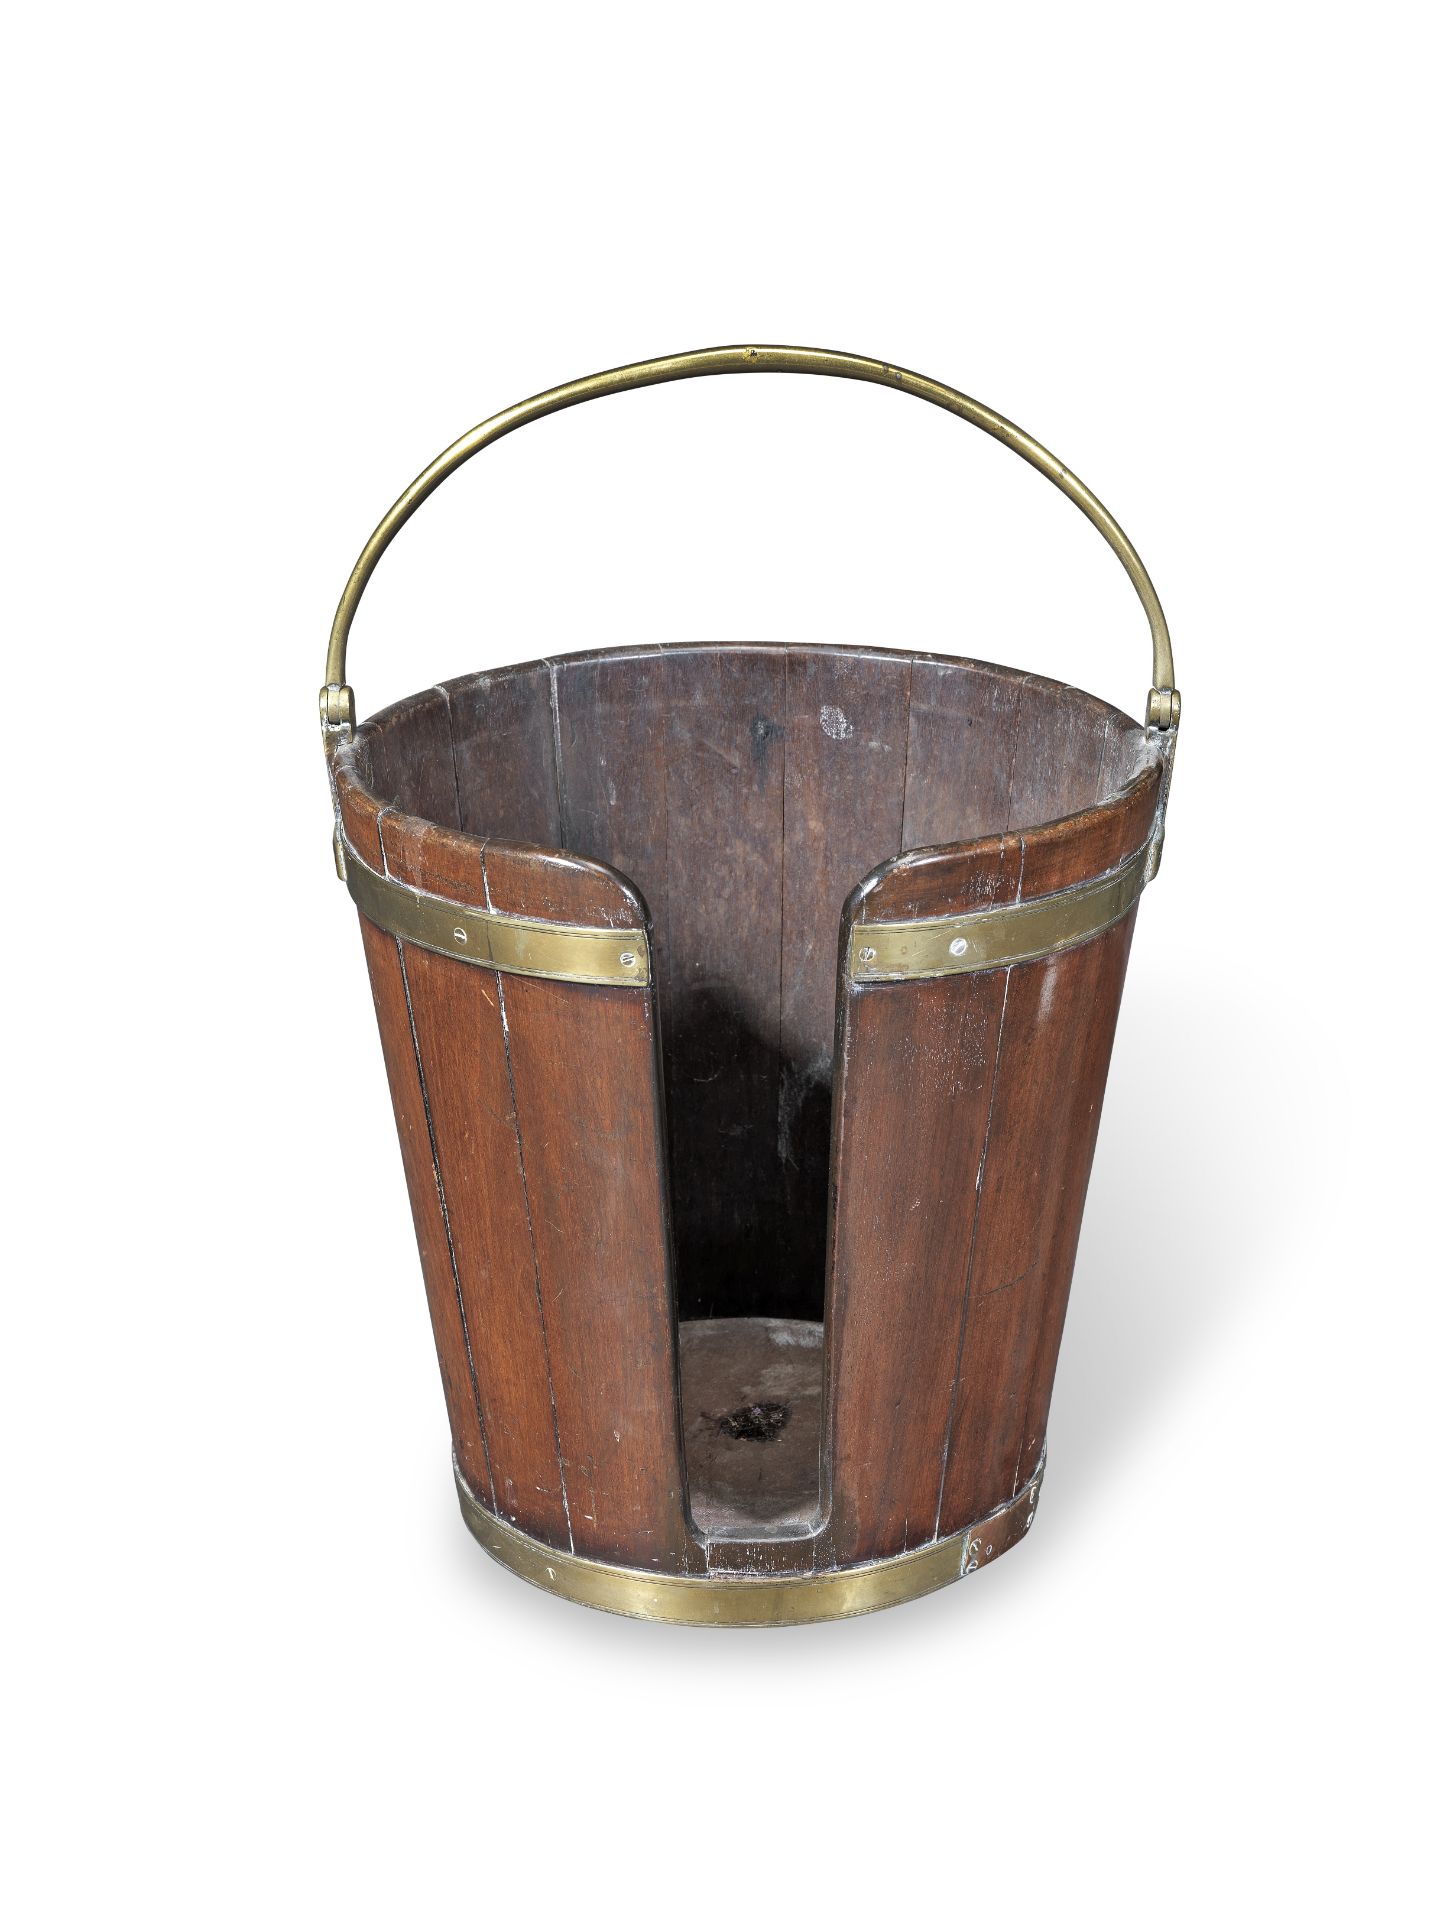 A George III mahogany and brass banded plate bucket